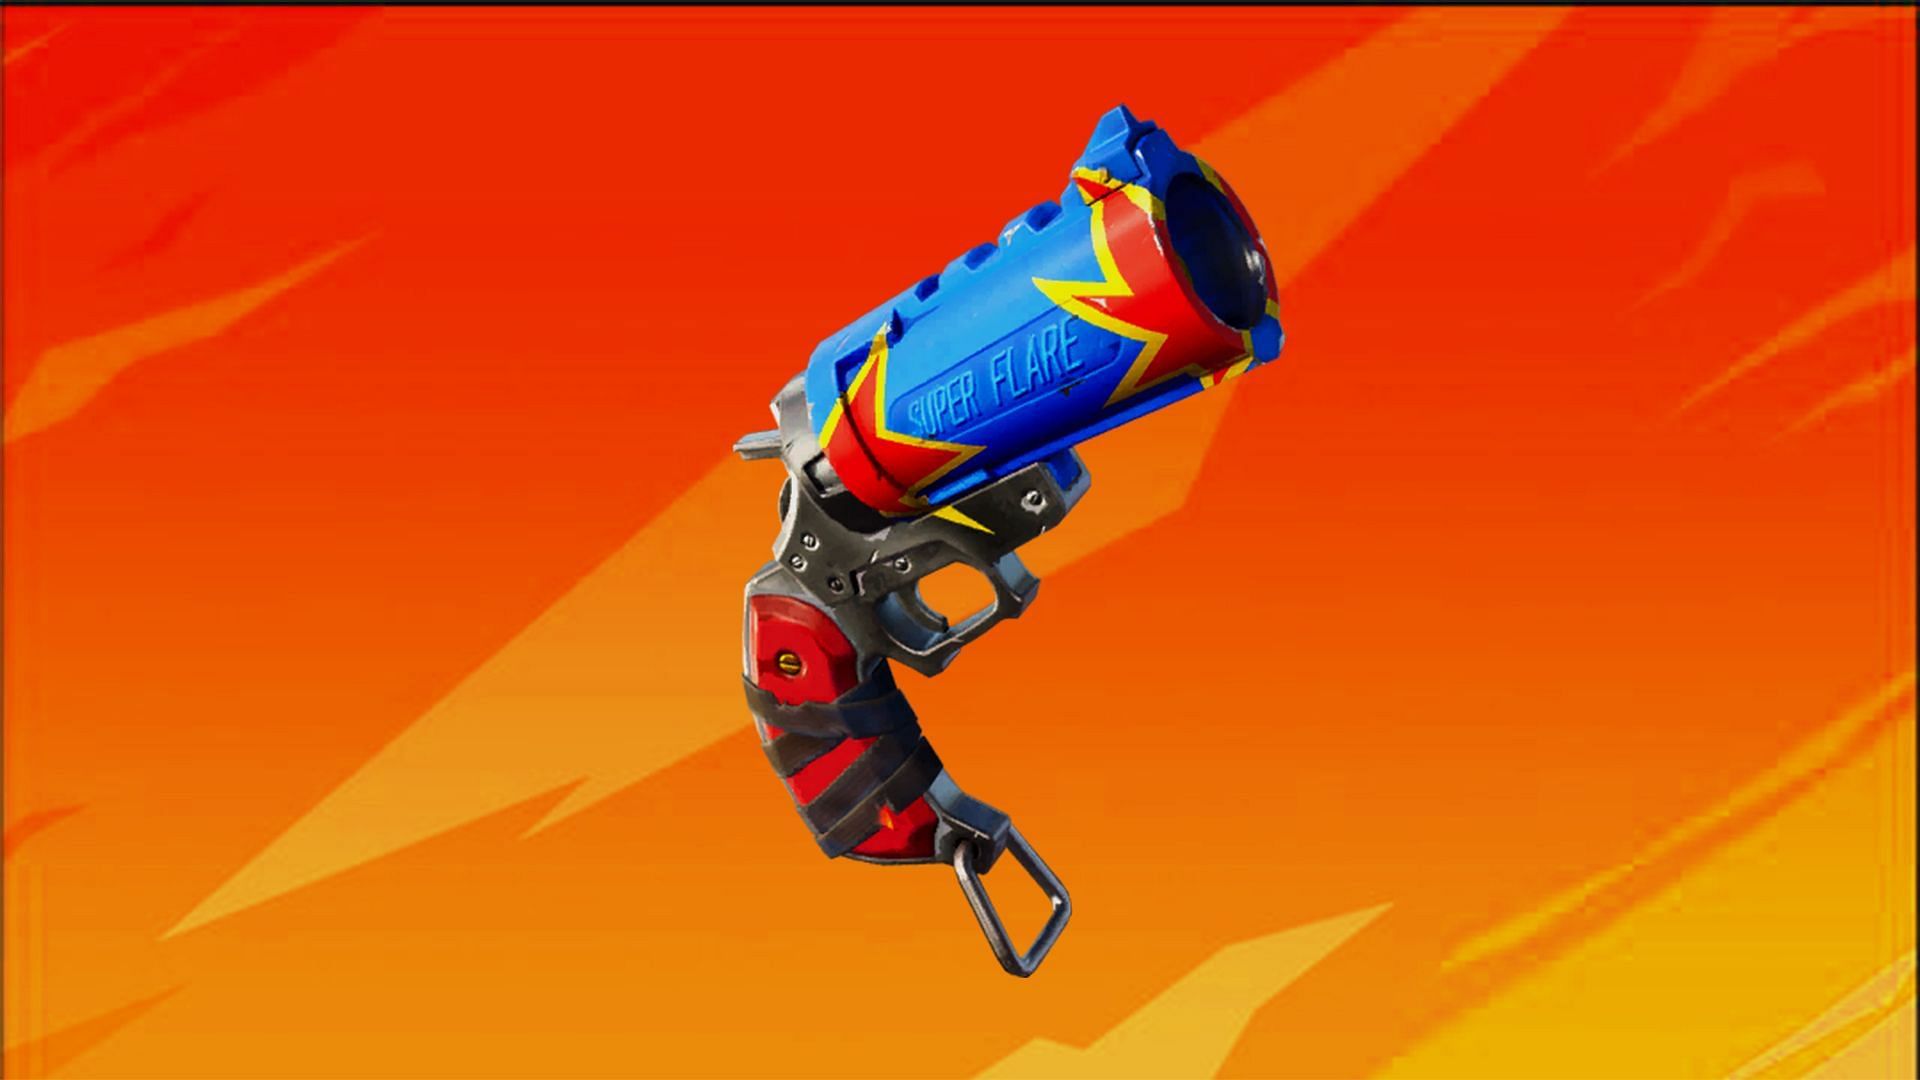 Range of the new Firework gun in Fortnite is more than you&#039;d expect (Image via Sportskeeda/Epic Games) 